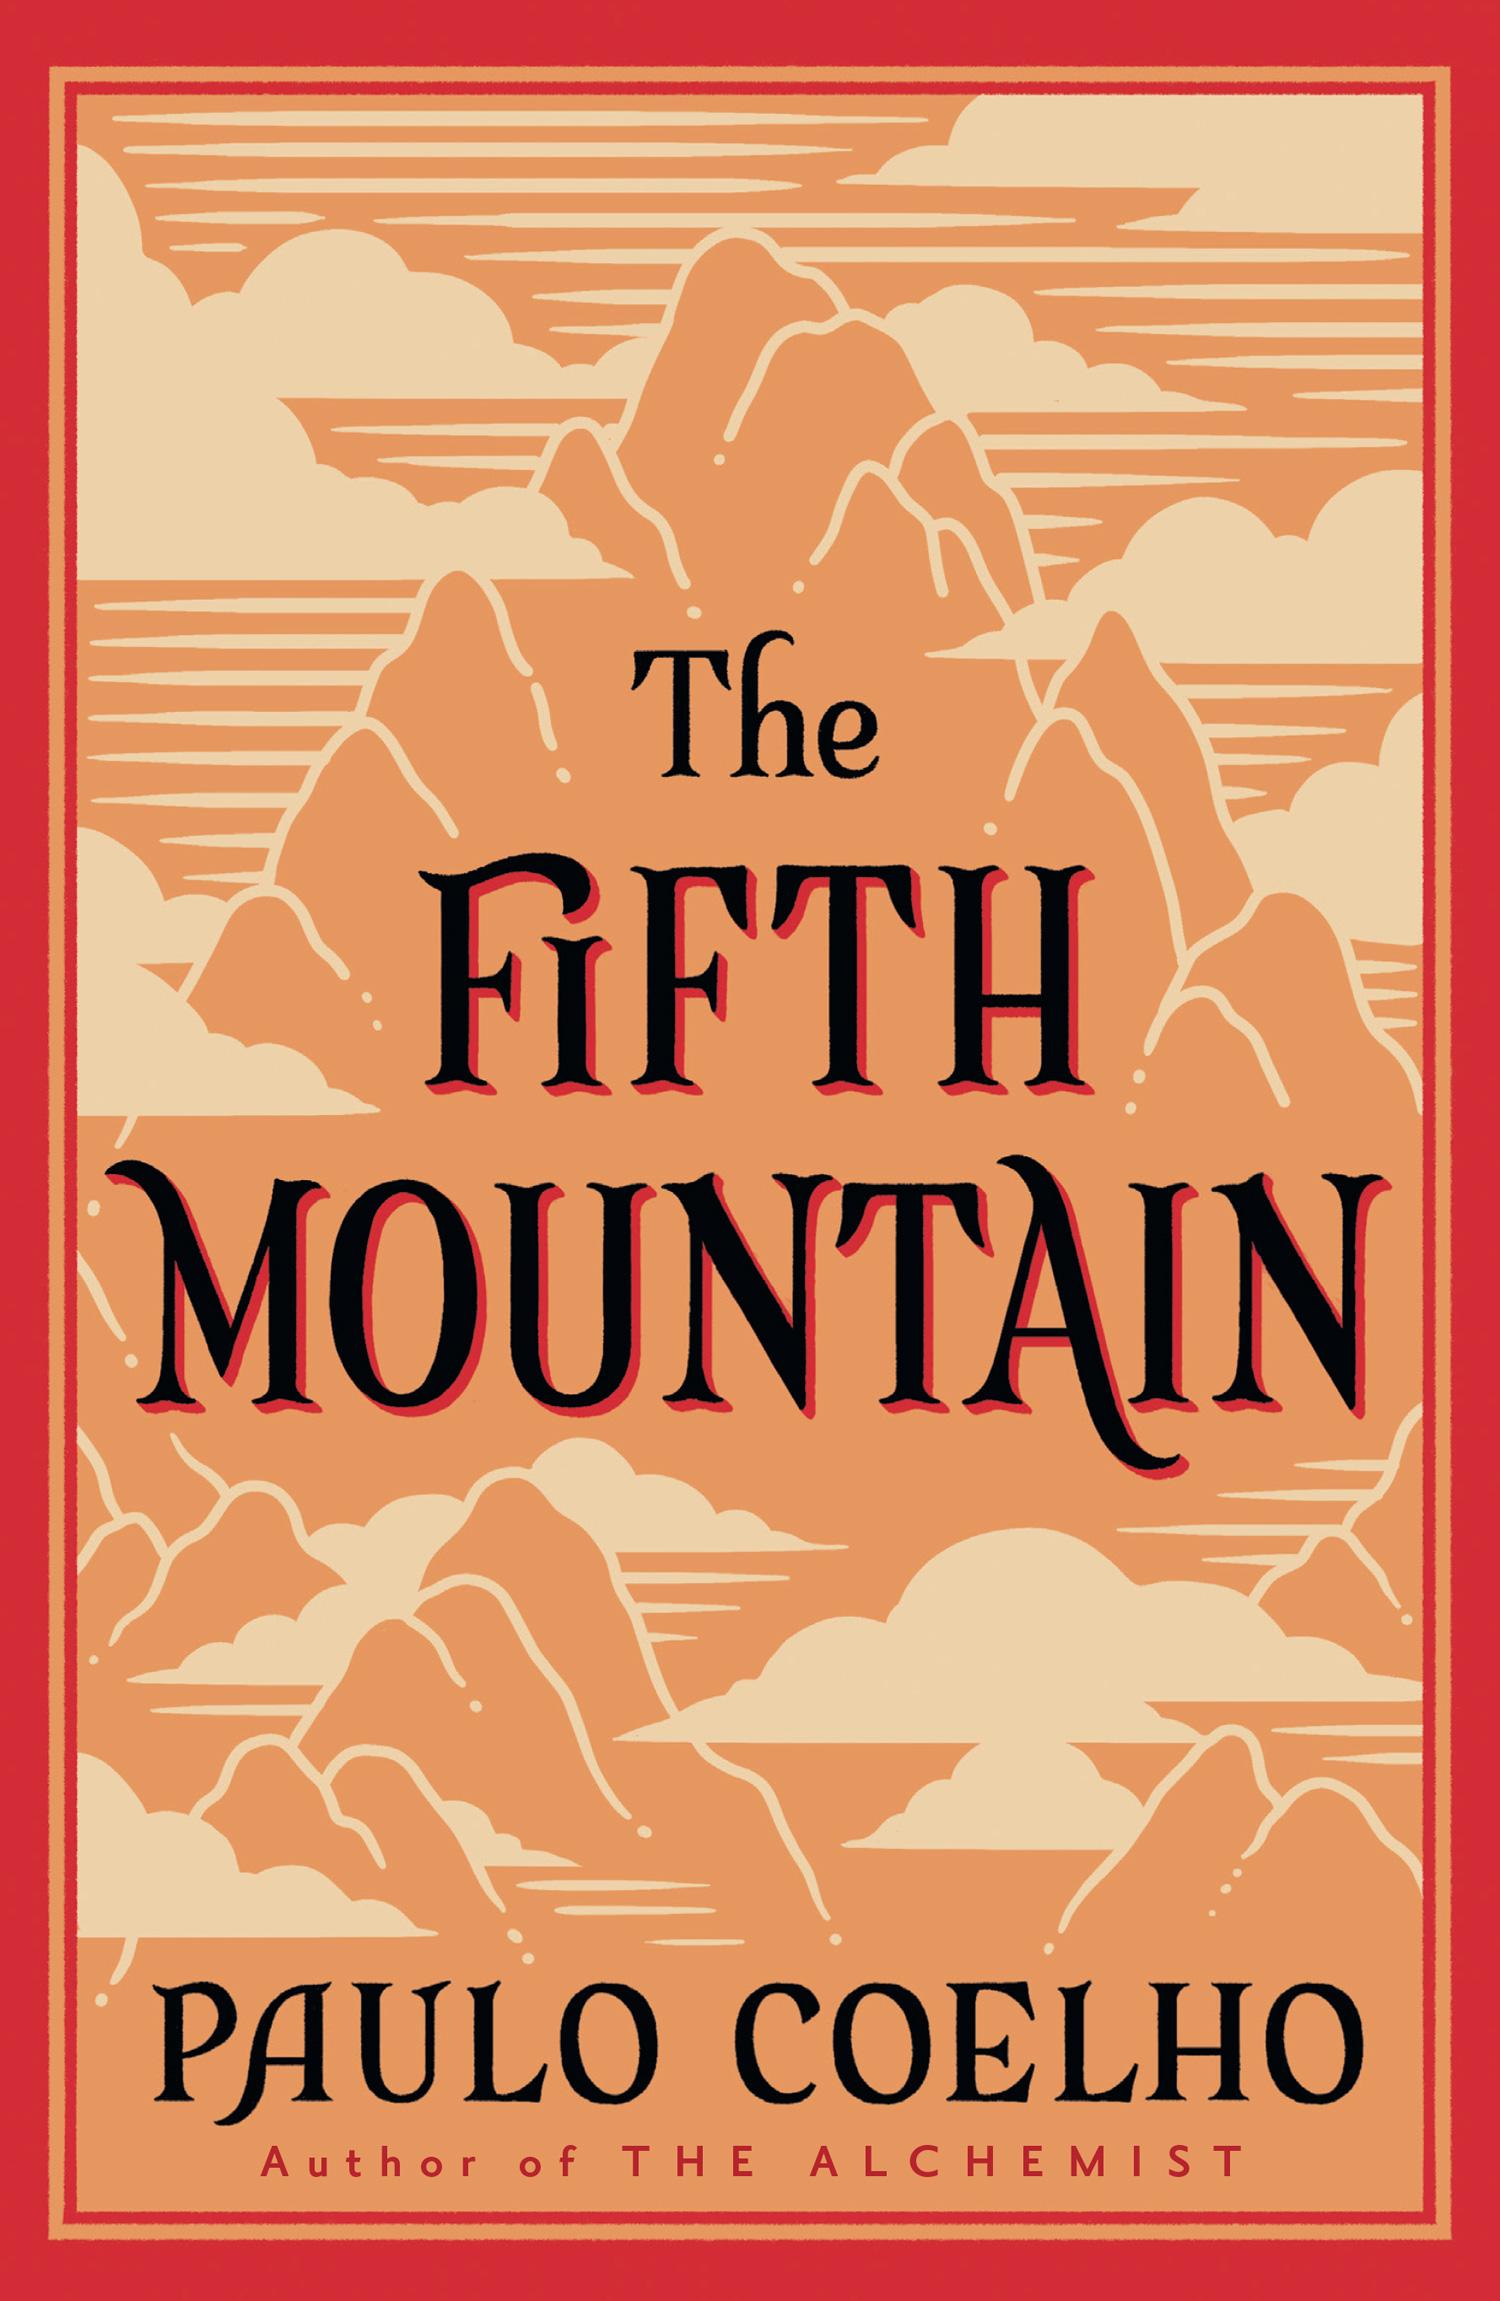 The Fifth Mountain / Paulo Coelho / Taschenbuch / XII / Englisch / 2000 / Harper Collins Publ. UK / EAN 9780722536544 - Coelho, Paulo